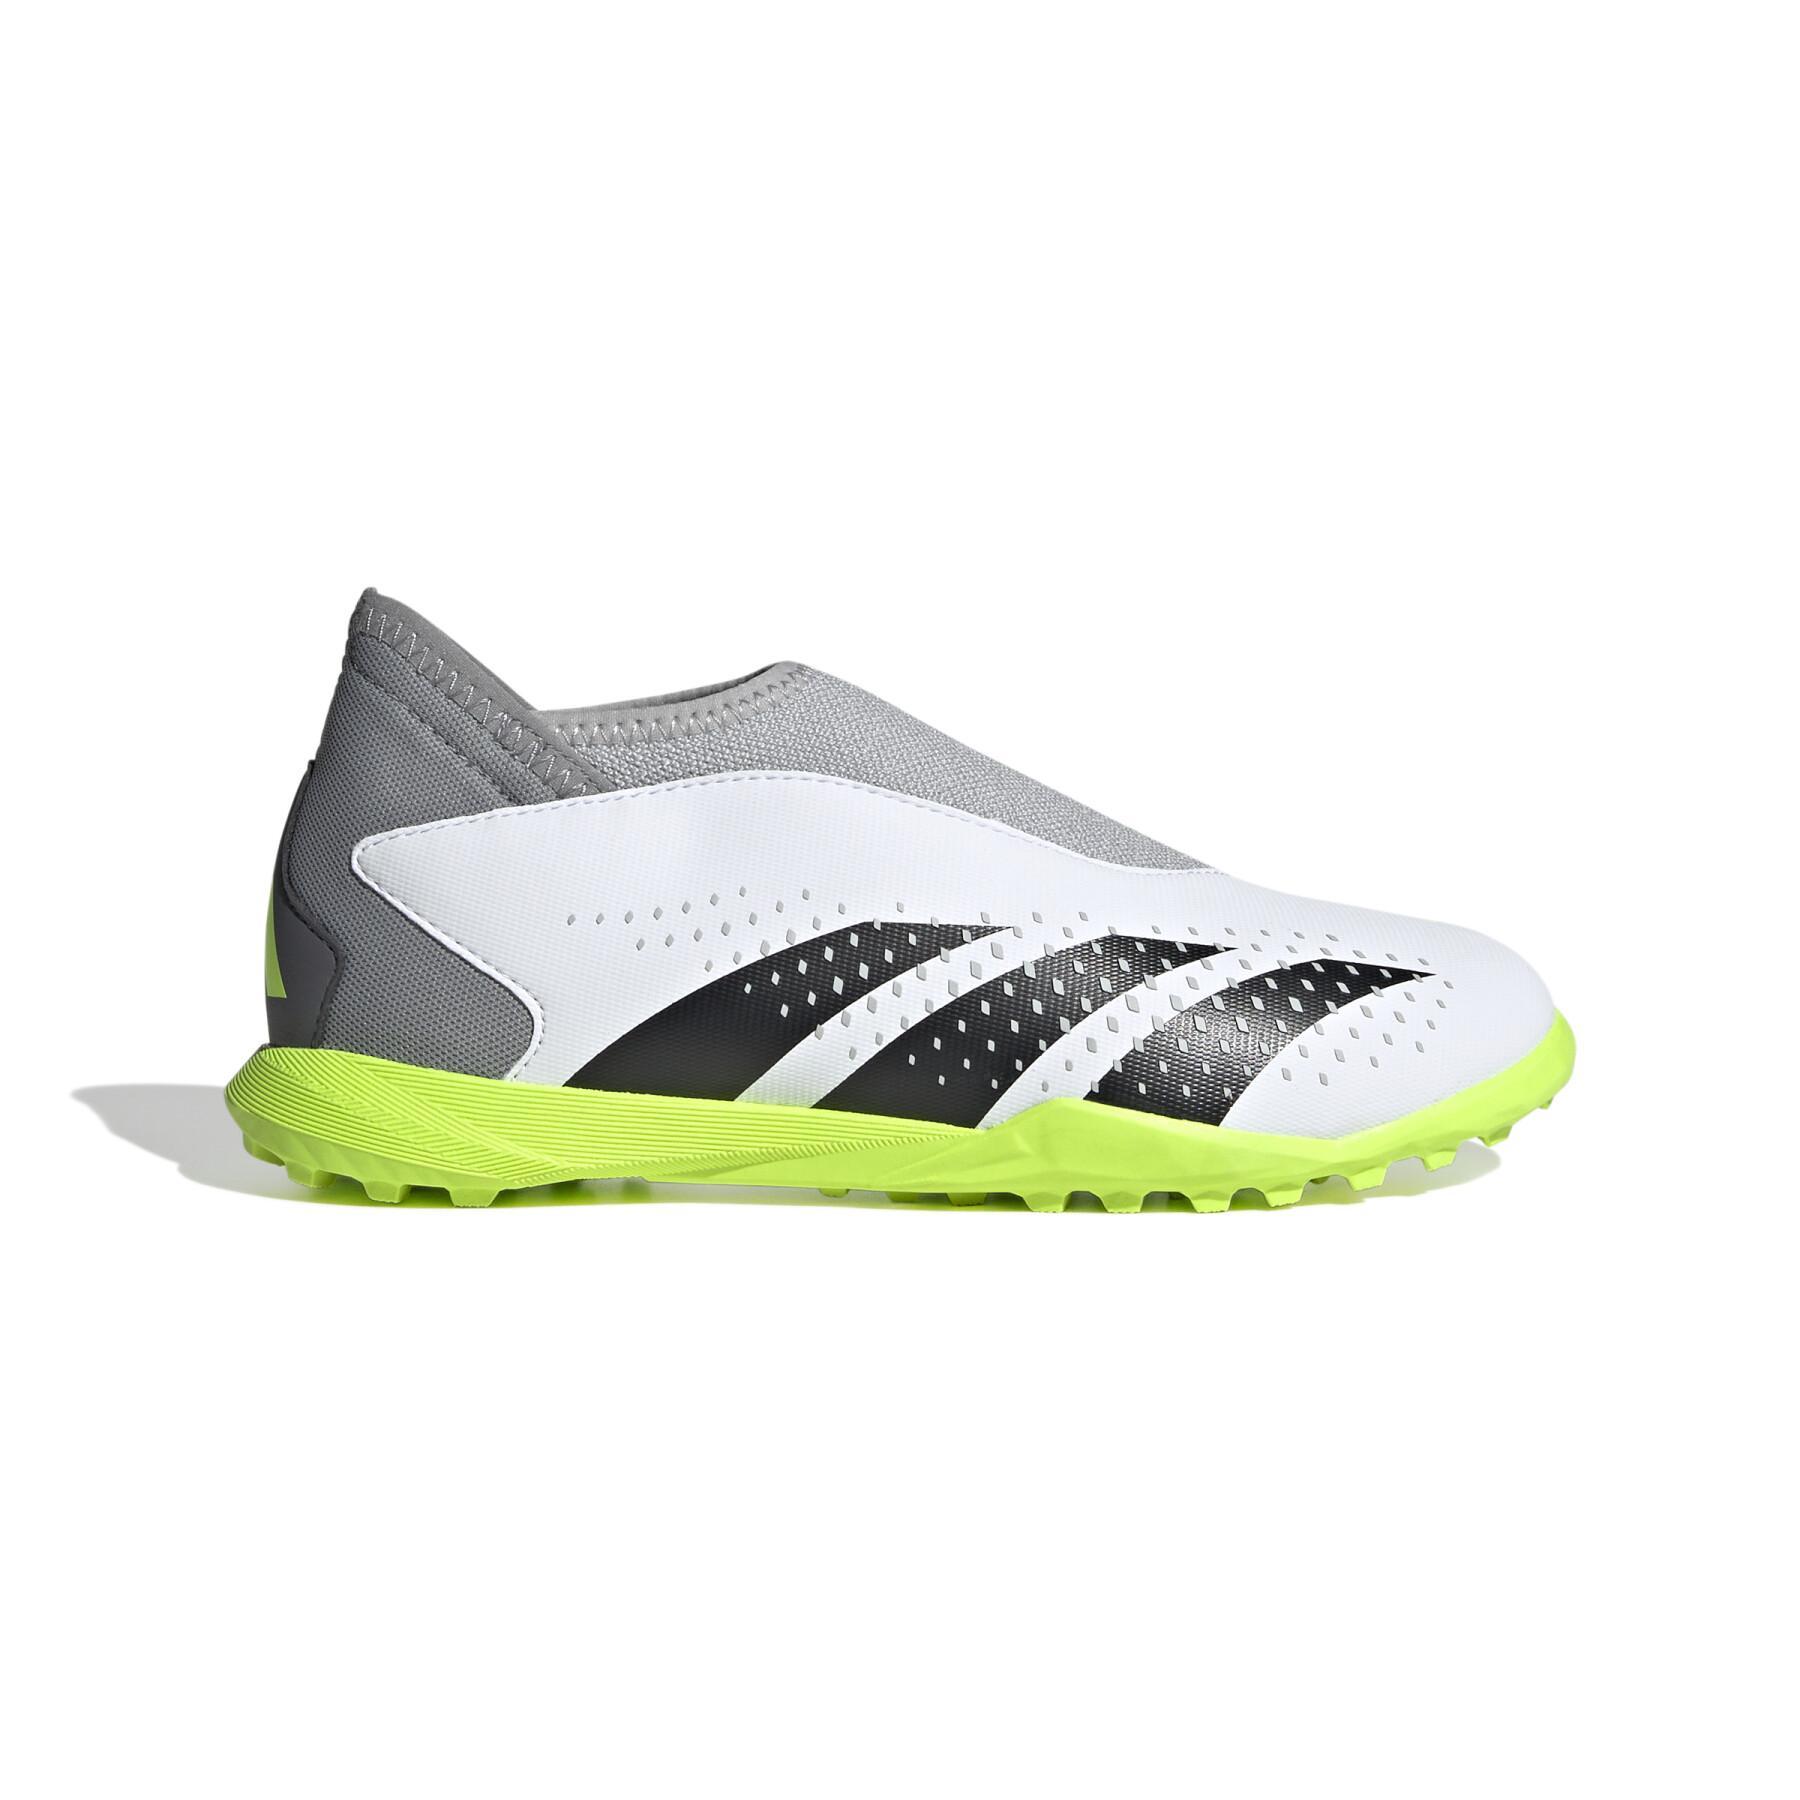 https://media.foot-store.es/catalog/product/cache/image/1800x/9df78eab33525d08d6e5fb8d27136e95/a/d/adidas_ie9436_1_footwear_photography_side_lateral_center_view_white.jpg